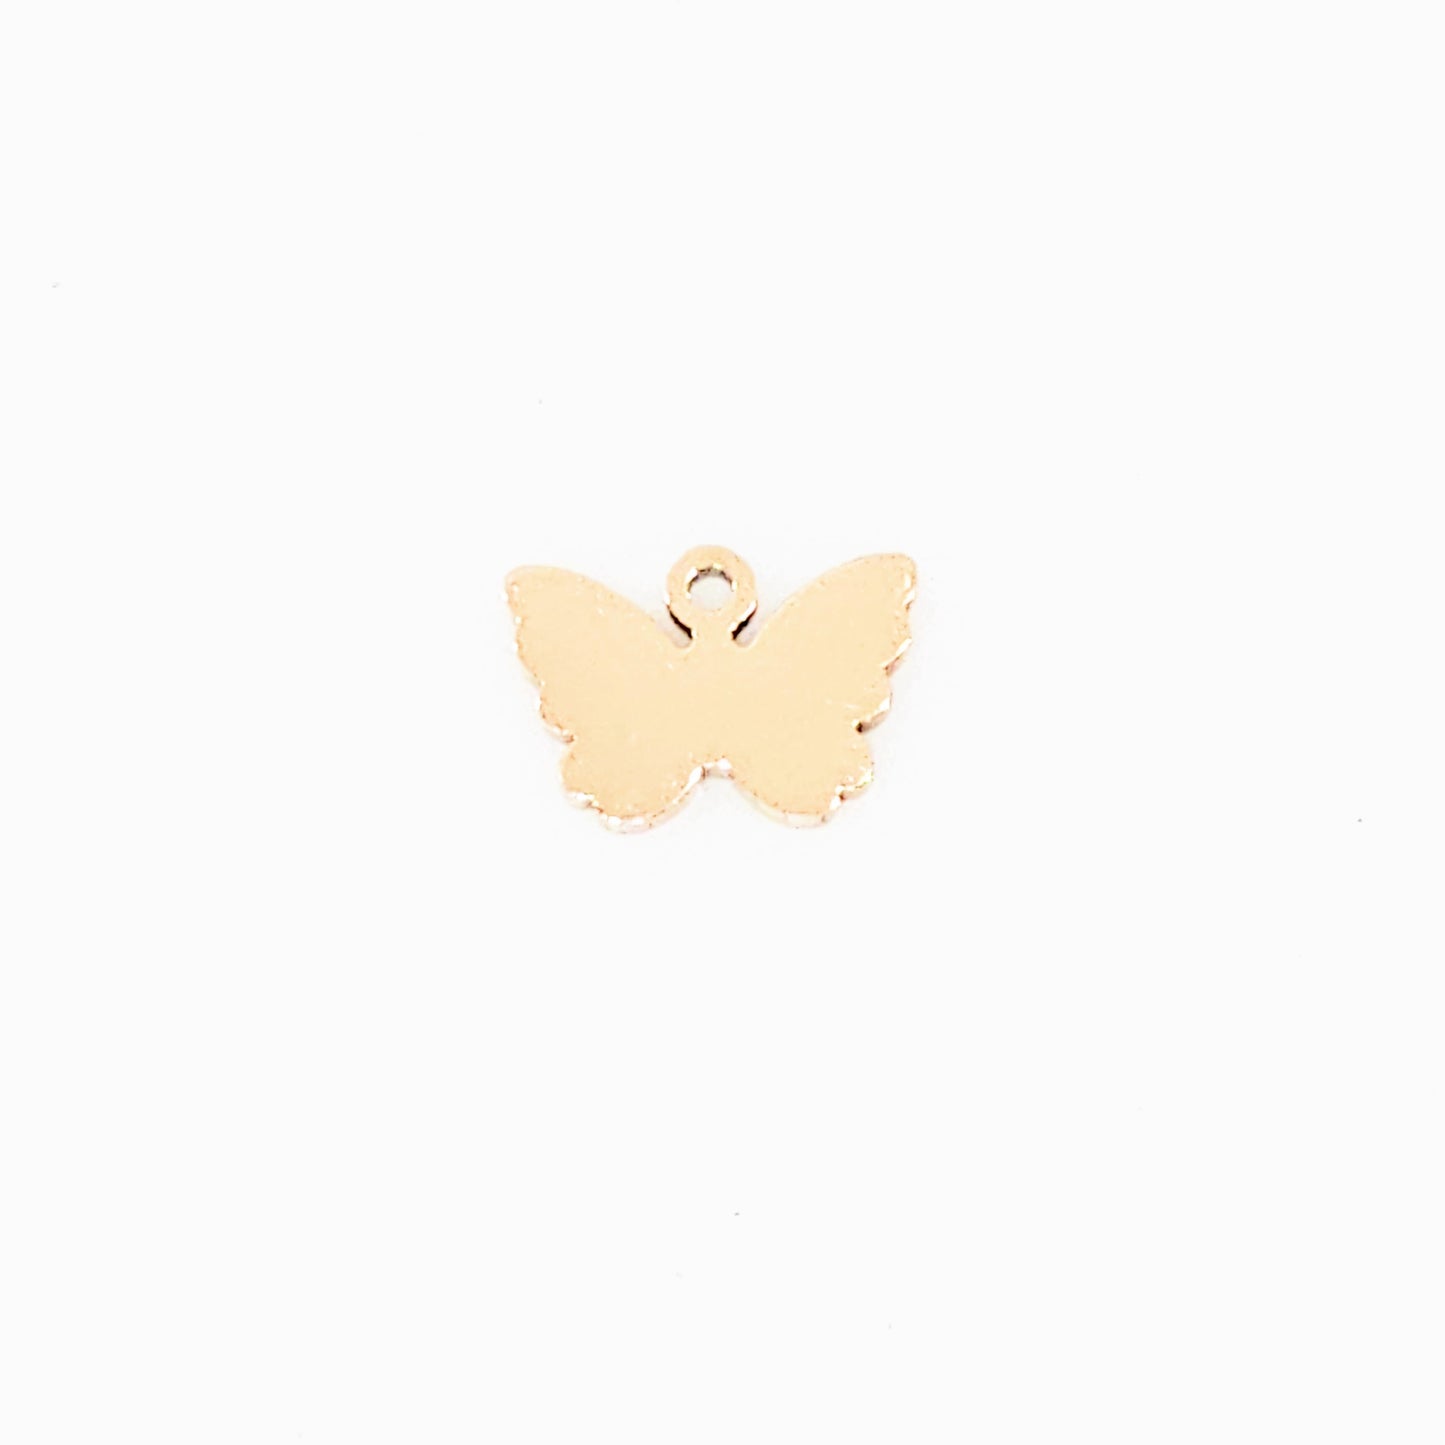 Tiny Butterfly Charm - Rose Gold Plated - 12mm x 8.5mm